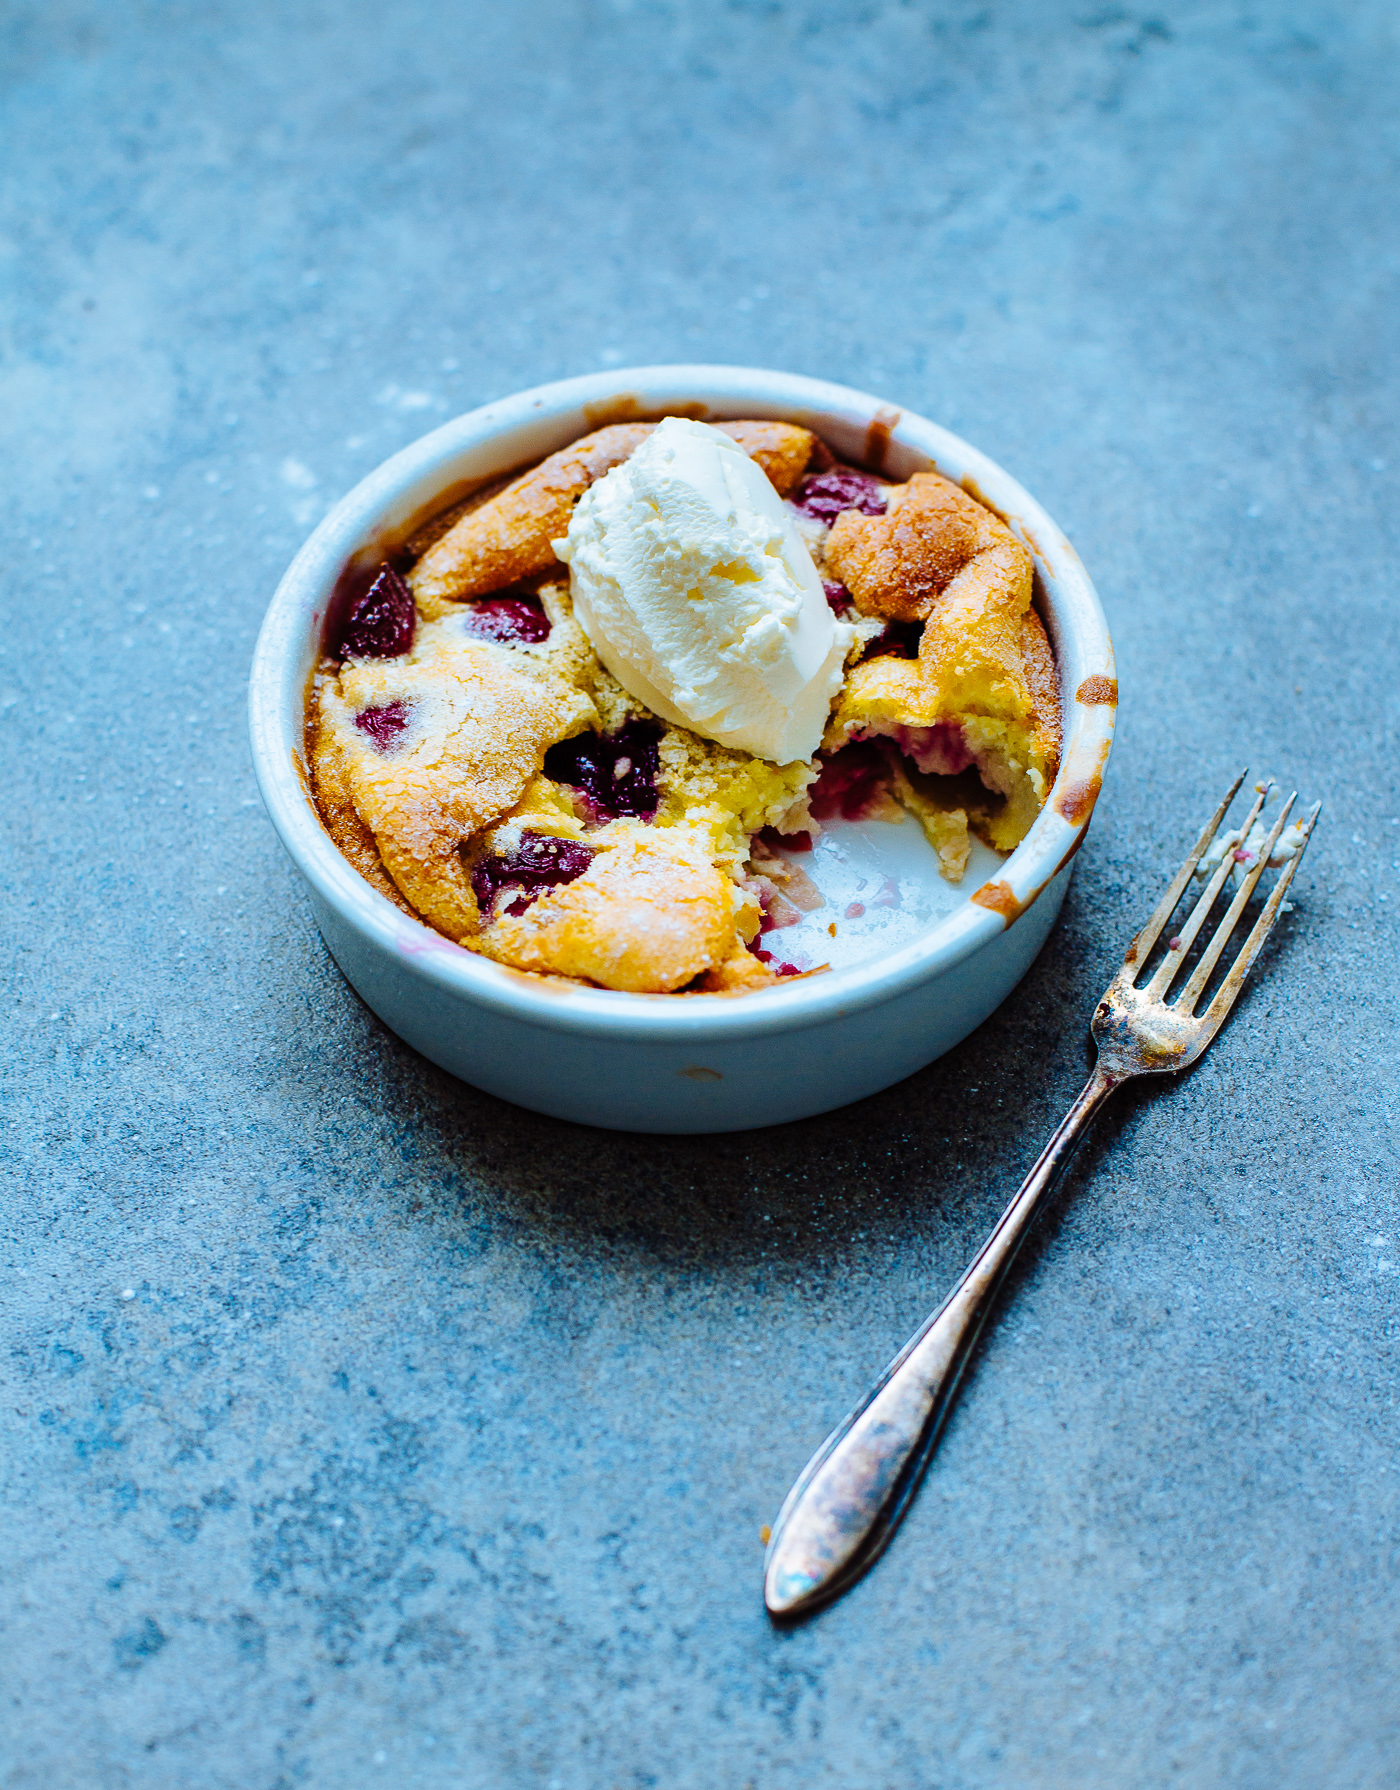 Cherry clafoutis with mascarpone and vanilla | The All-Day Kitchen